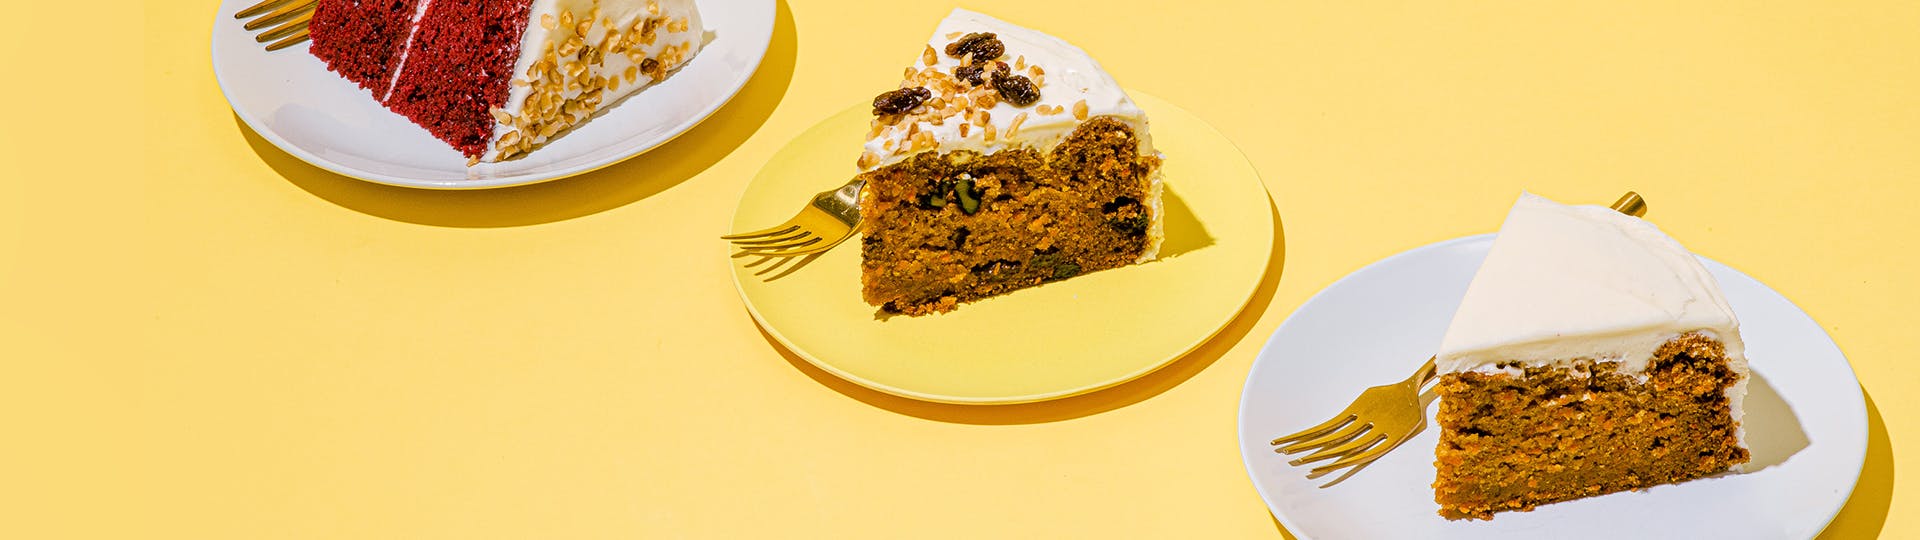 15 Places to Get Incredibly Moist Carrot Cake in Manila | Booky